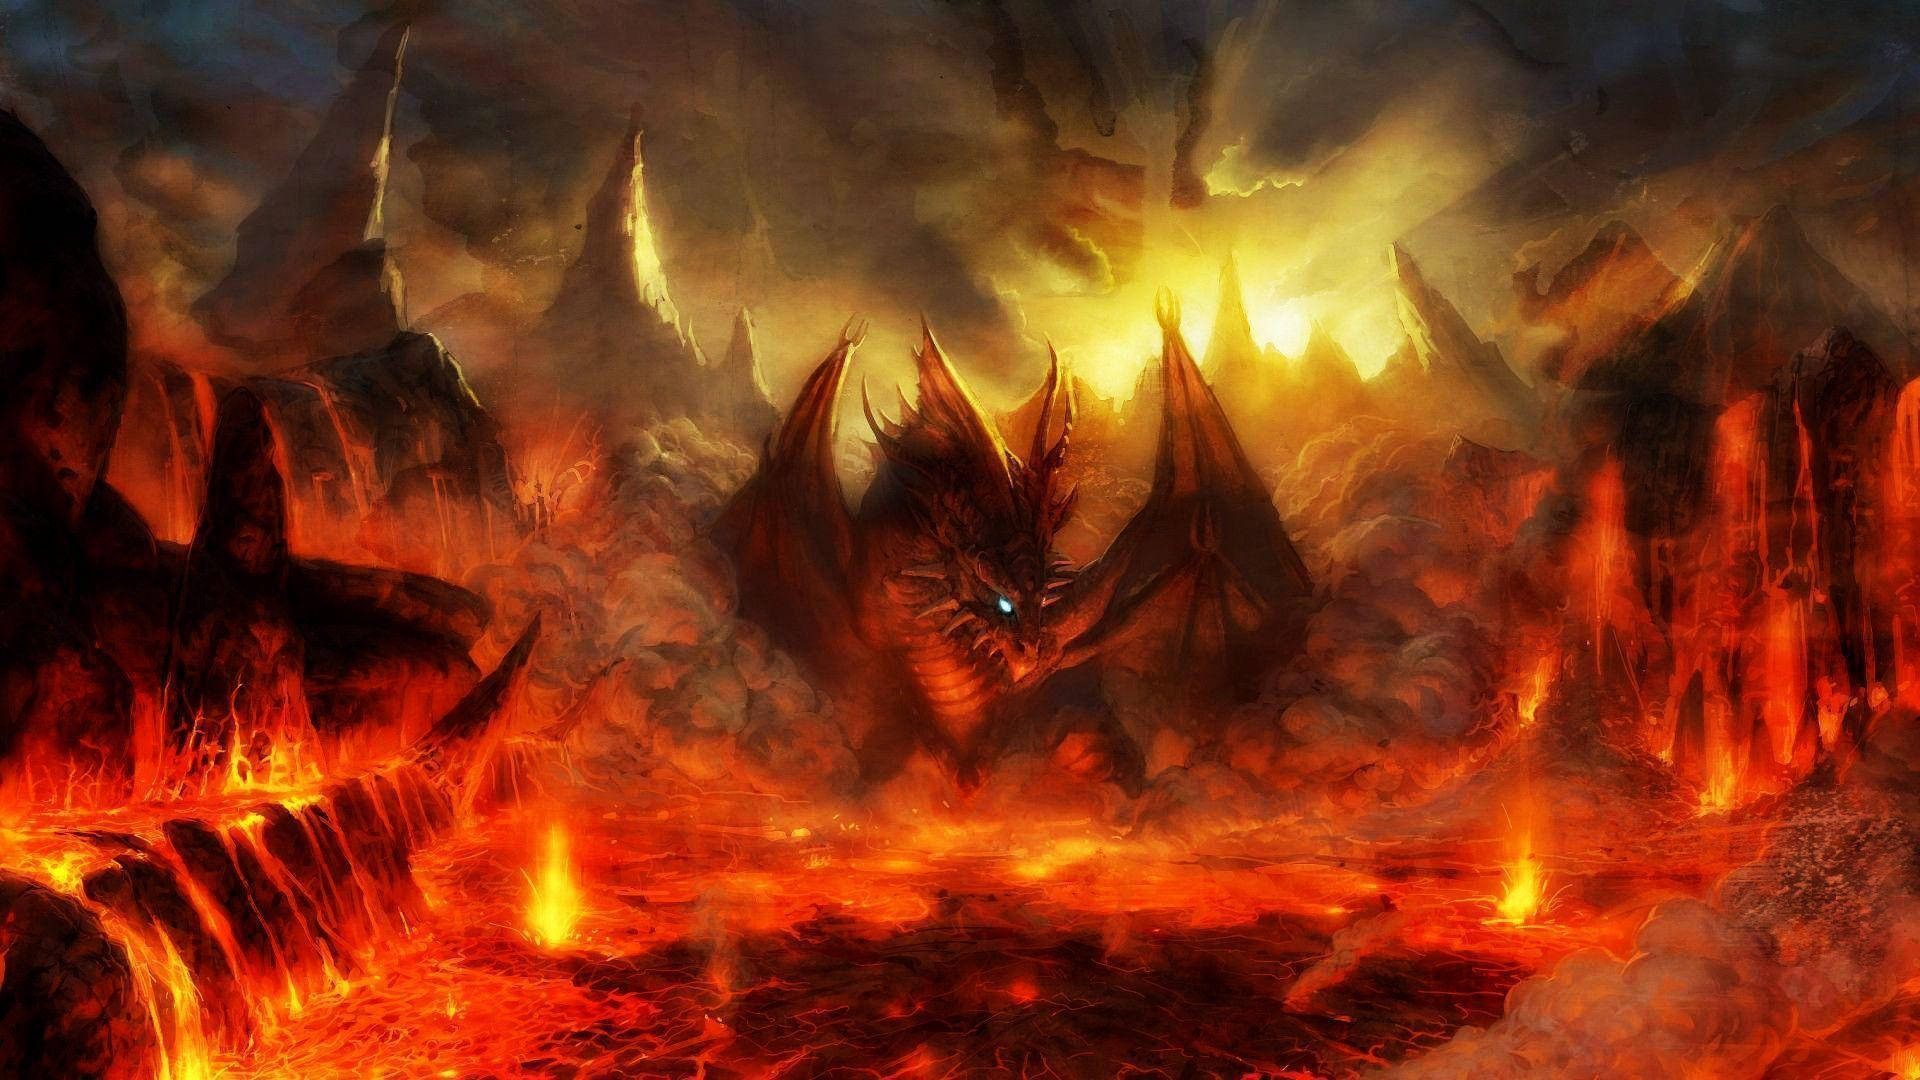 "Welcome to Hell" Wallpaper